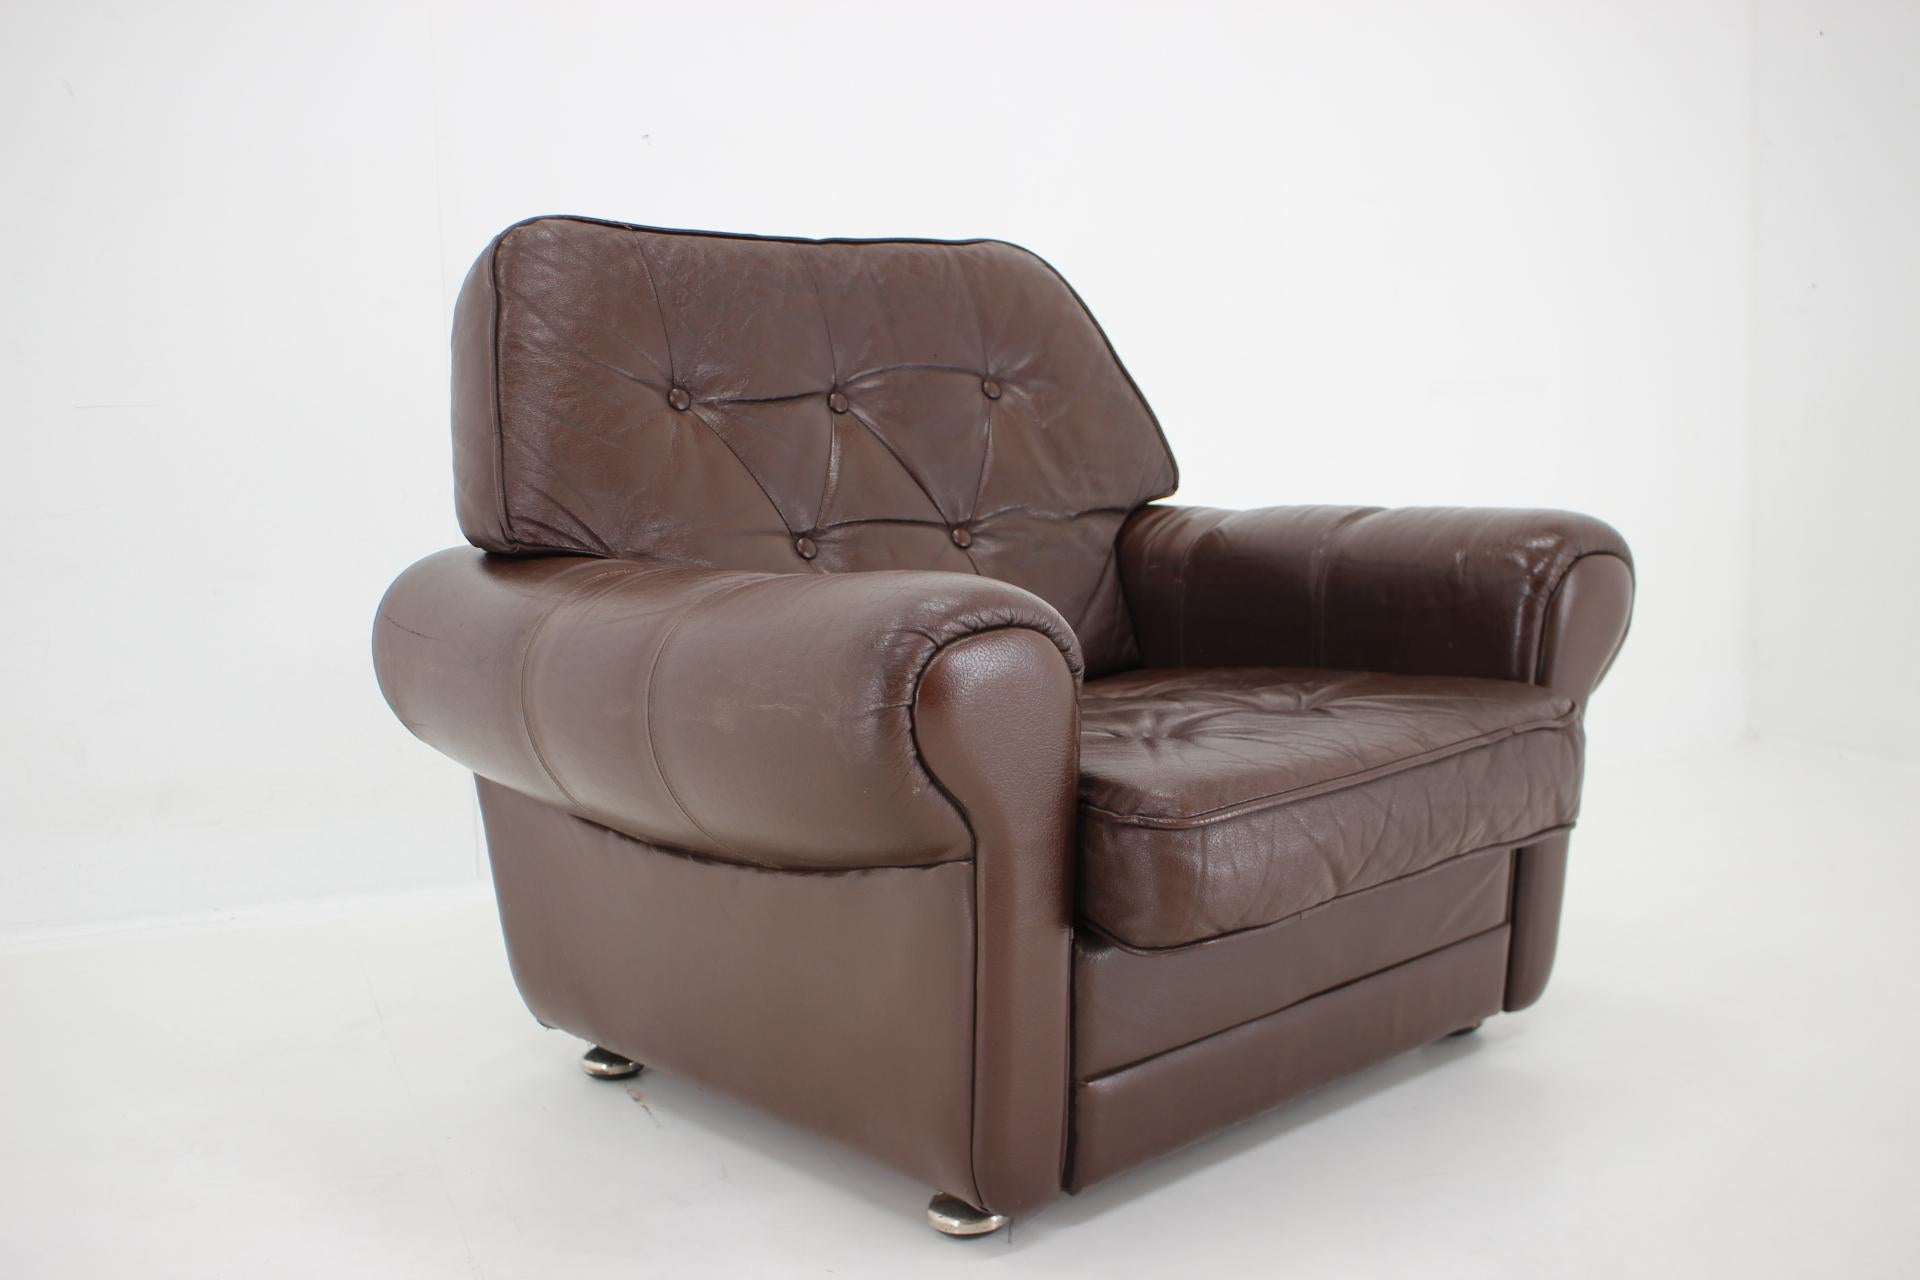 Late 20th Century 1970s Danish Brown Leather Armchair, Denmark For Sale